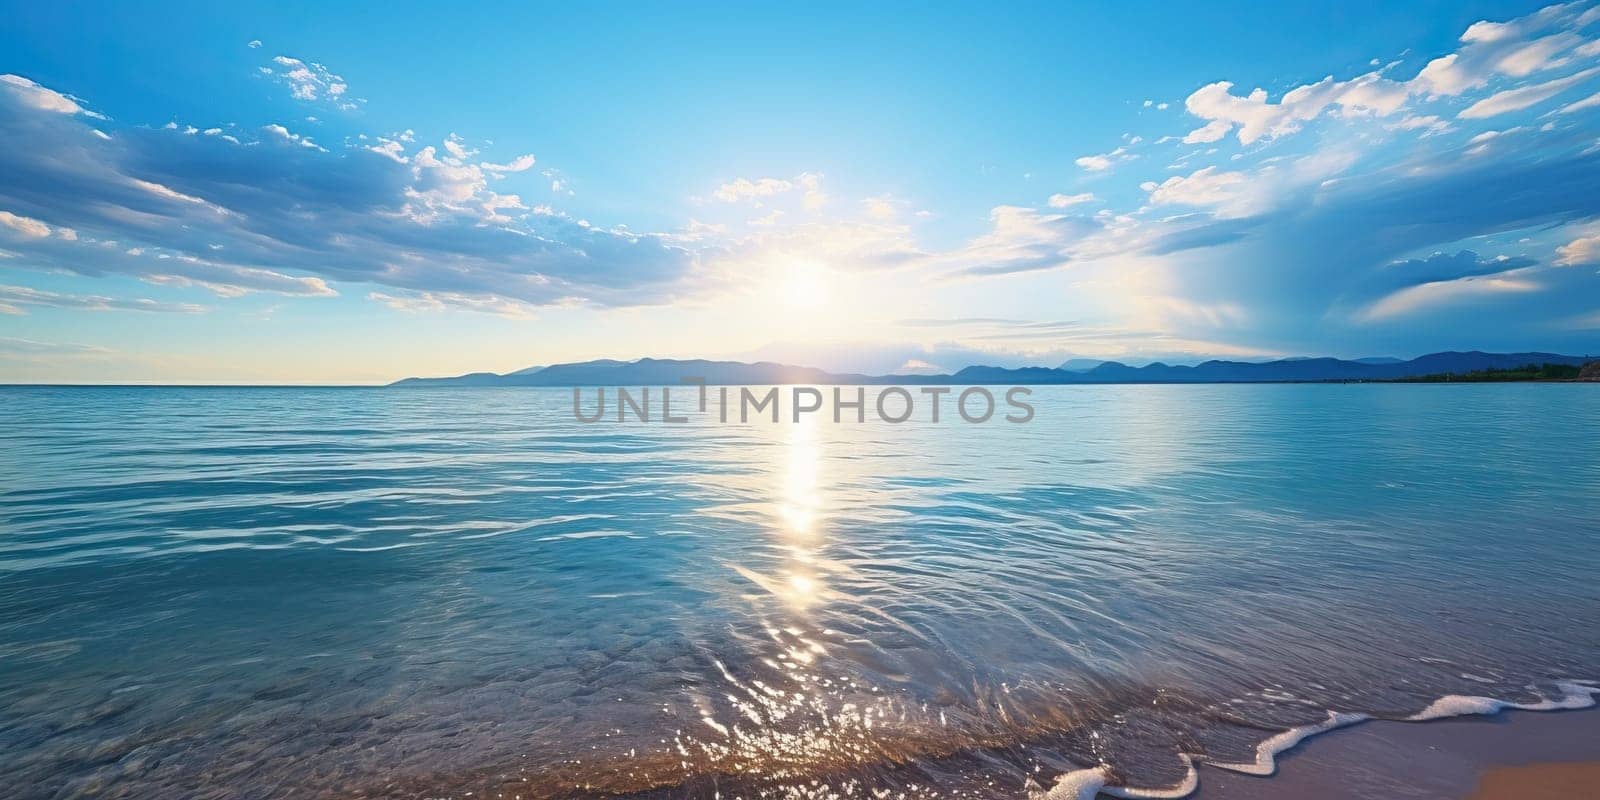 Sunset illuminating a calm sea with a sandy shore under a partly cloudy sky